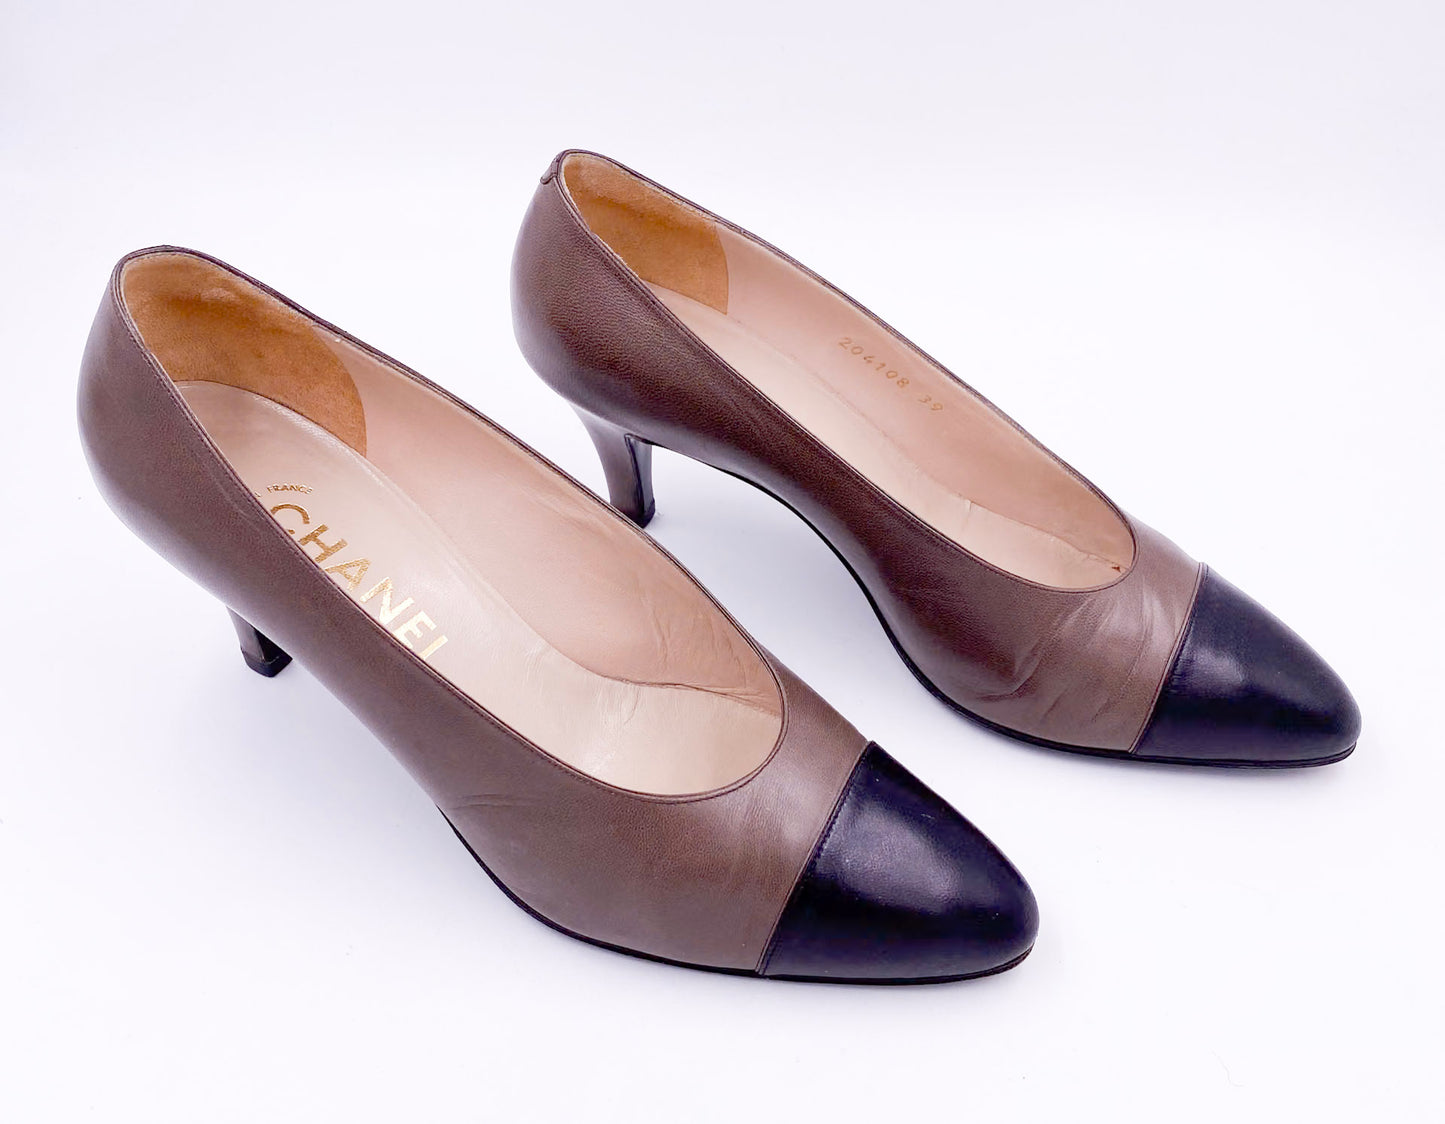 Chanel Pumps Taupe With Black Leather Toe